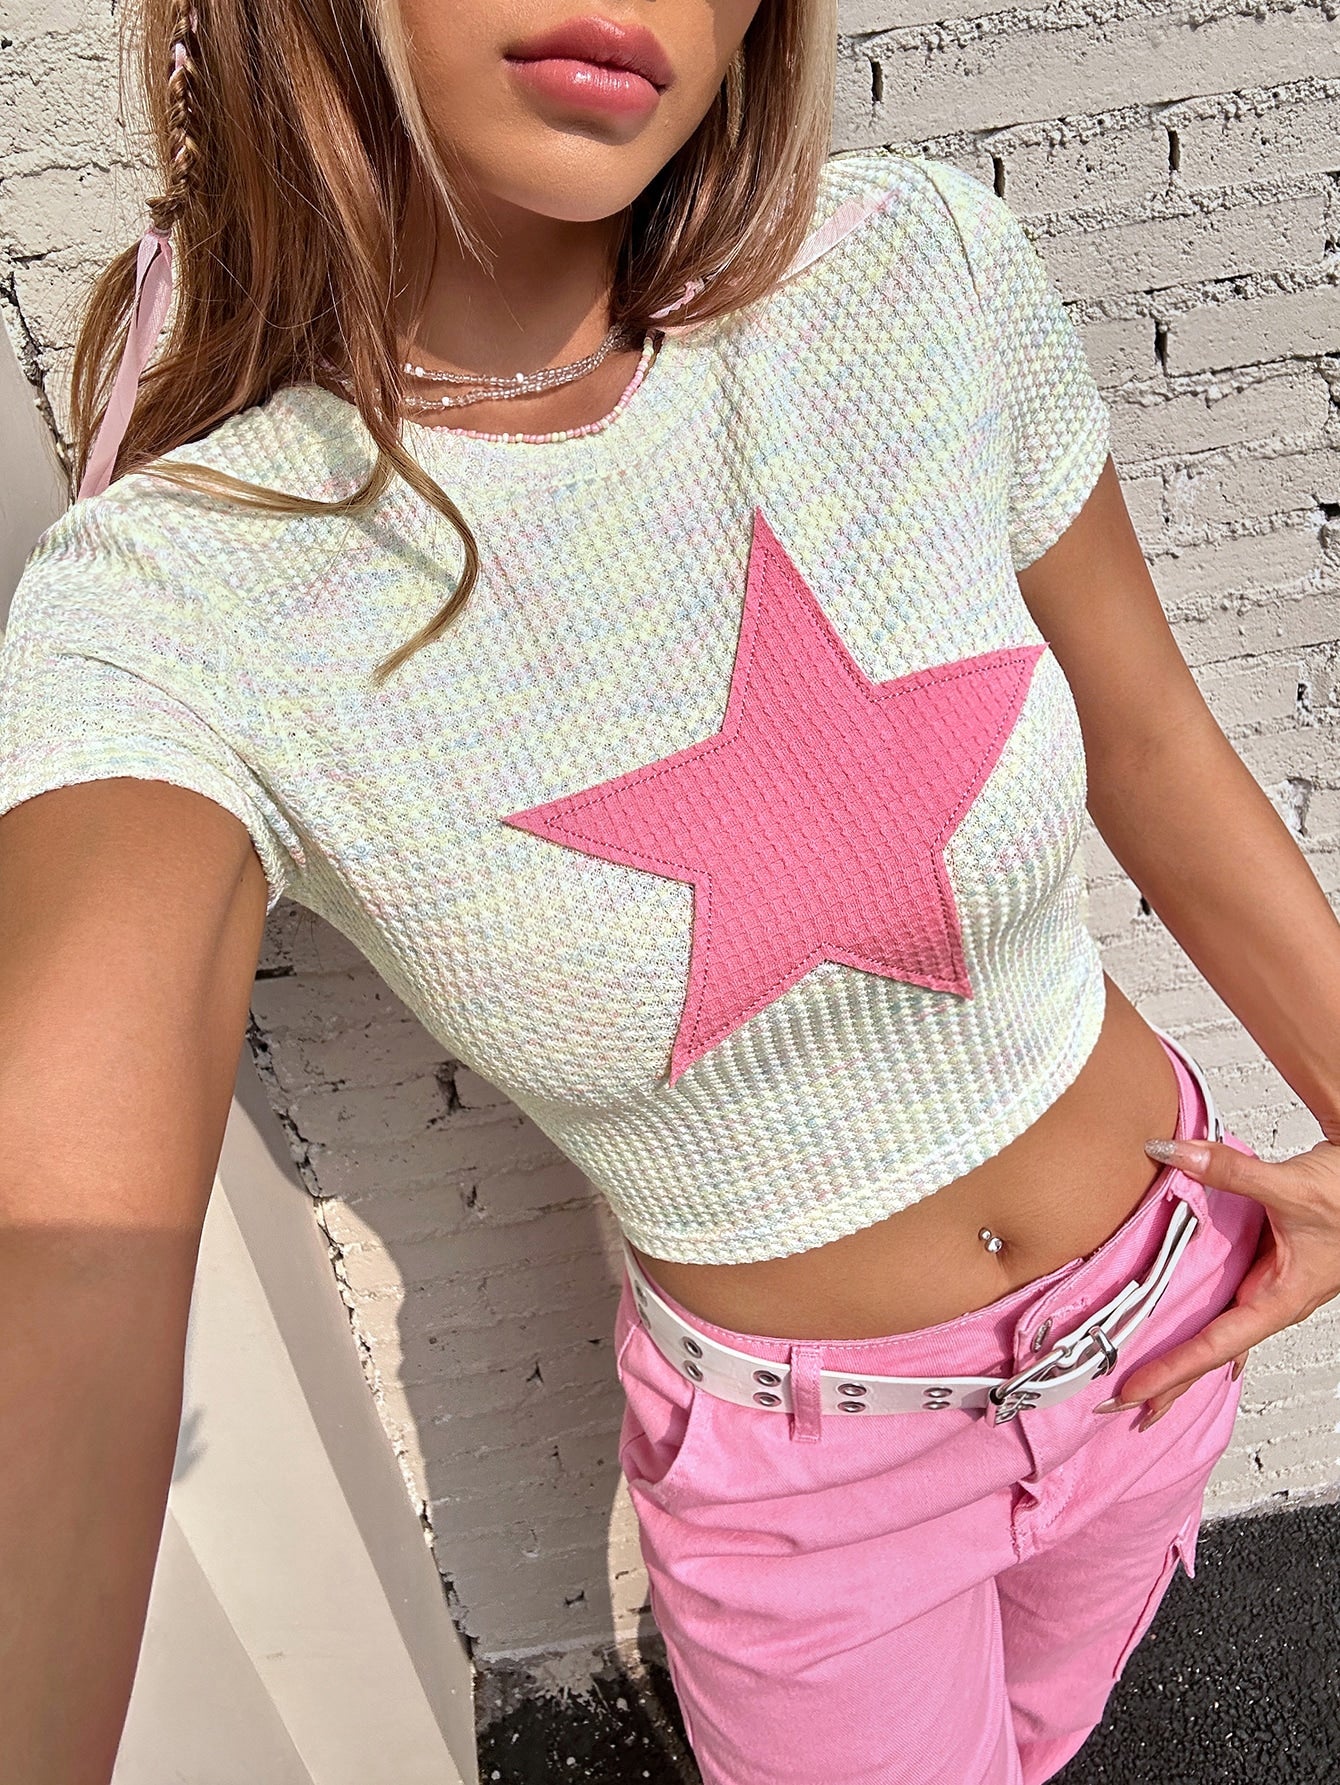 Star Patched Crop Tee